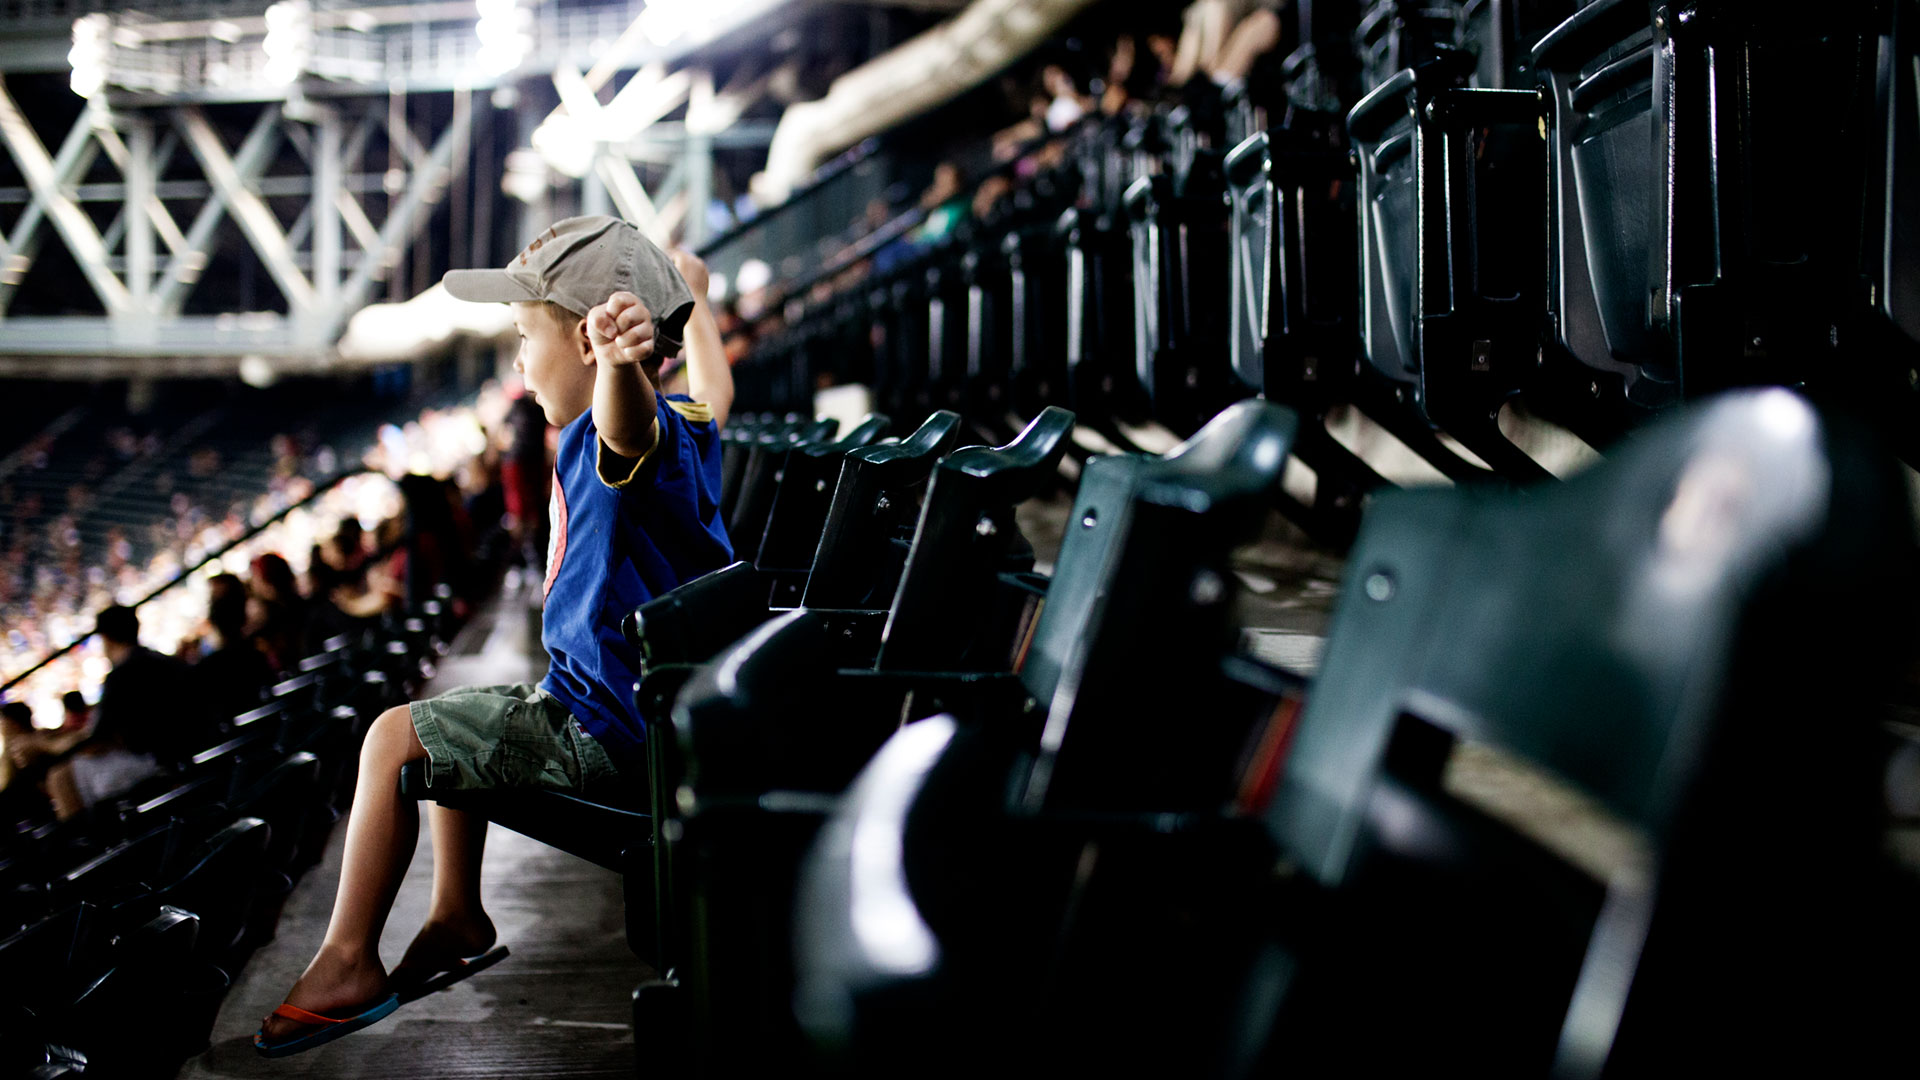 An excited child sitting in the stands at a baseball game